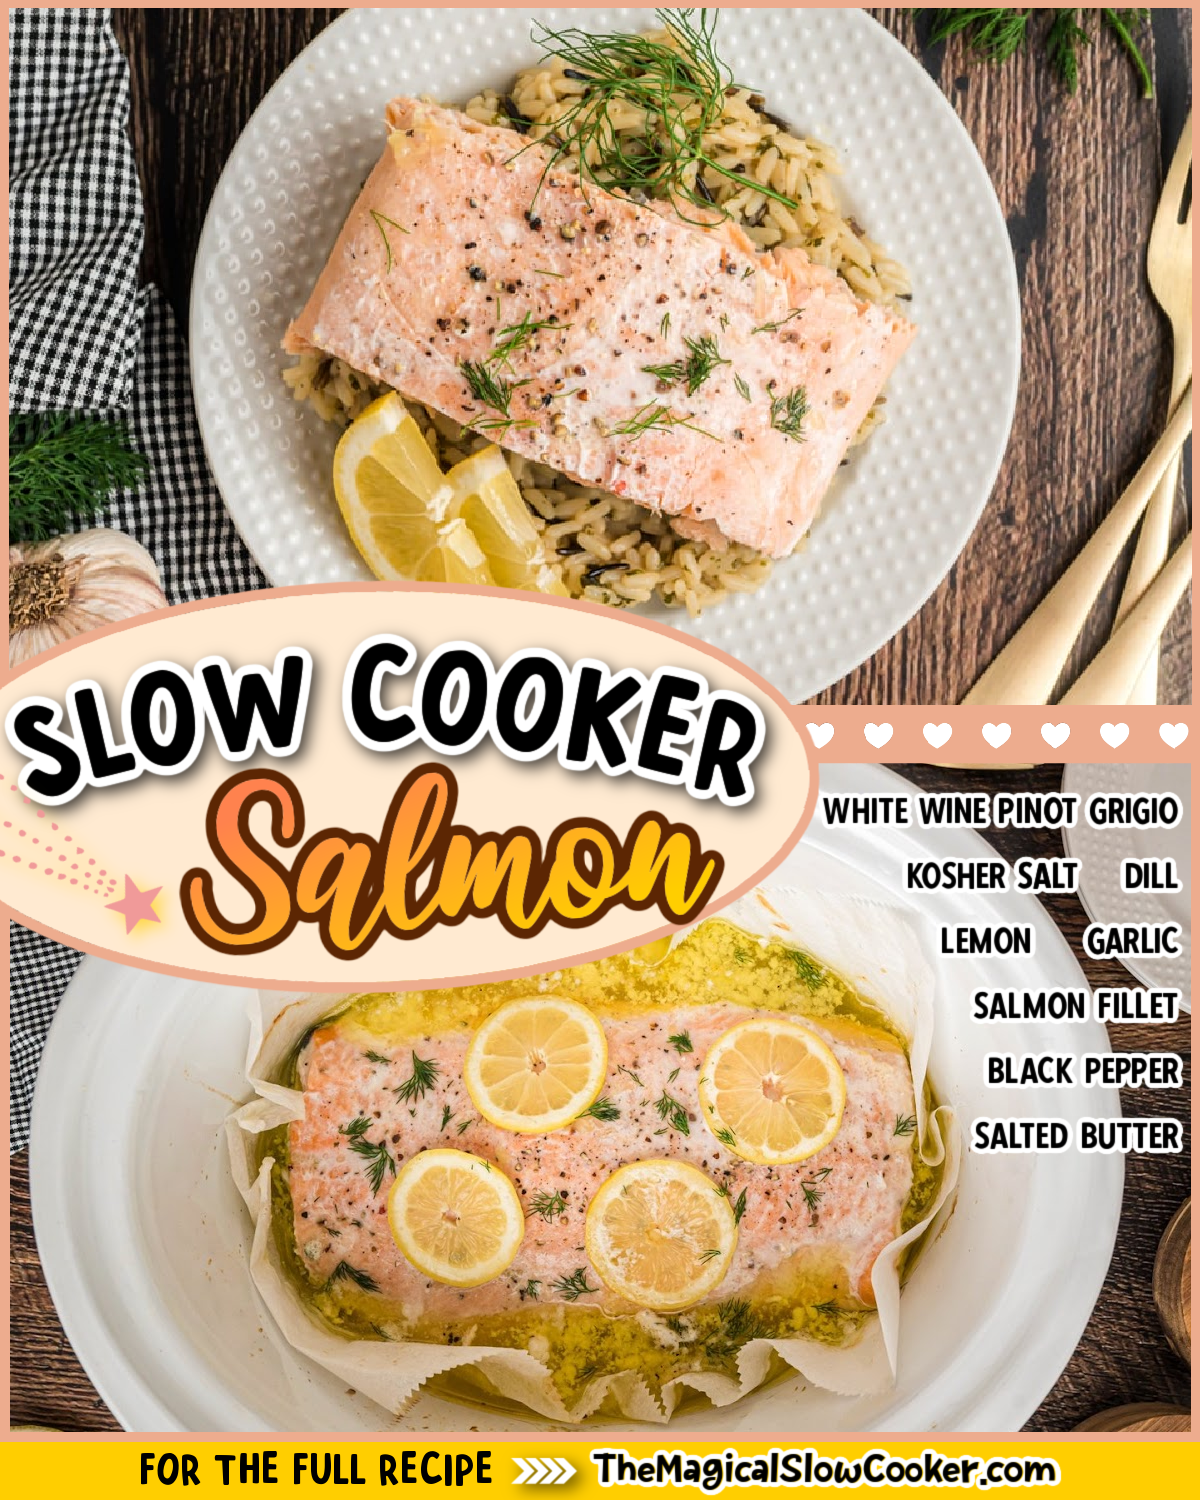 Salmon images with text of what the ingredients are.